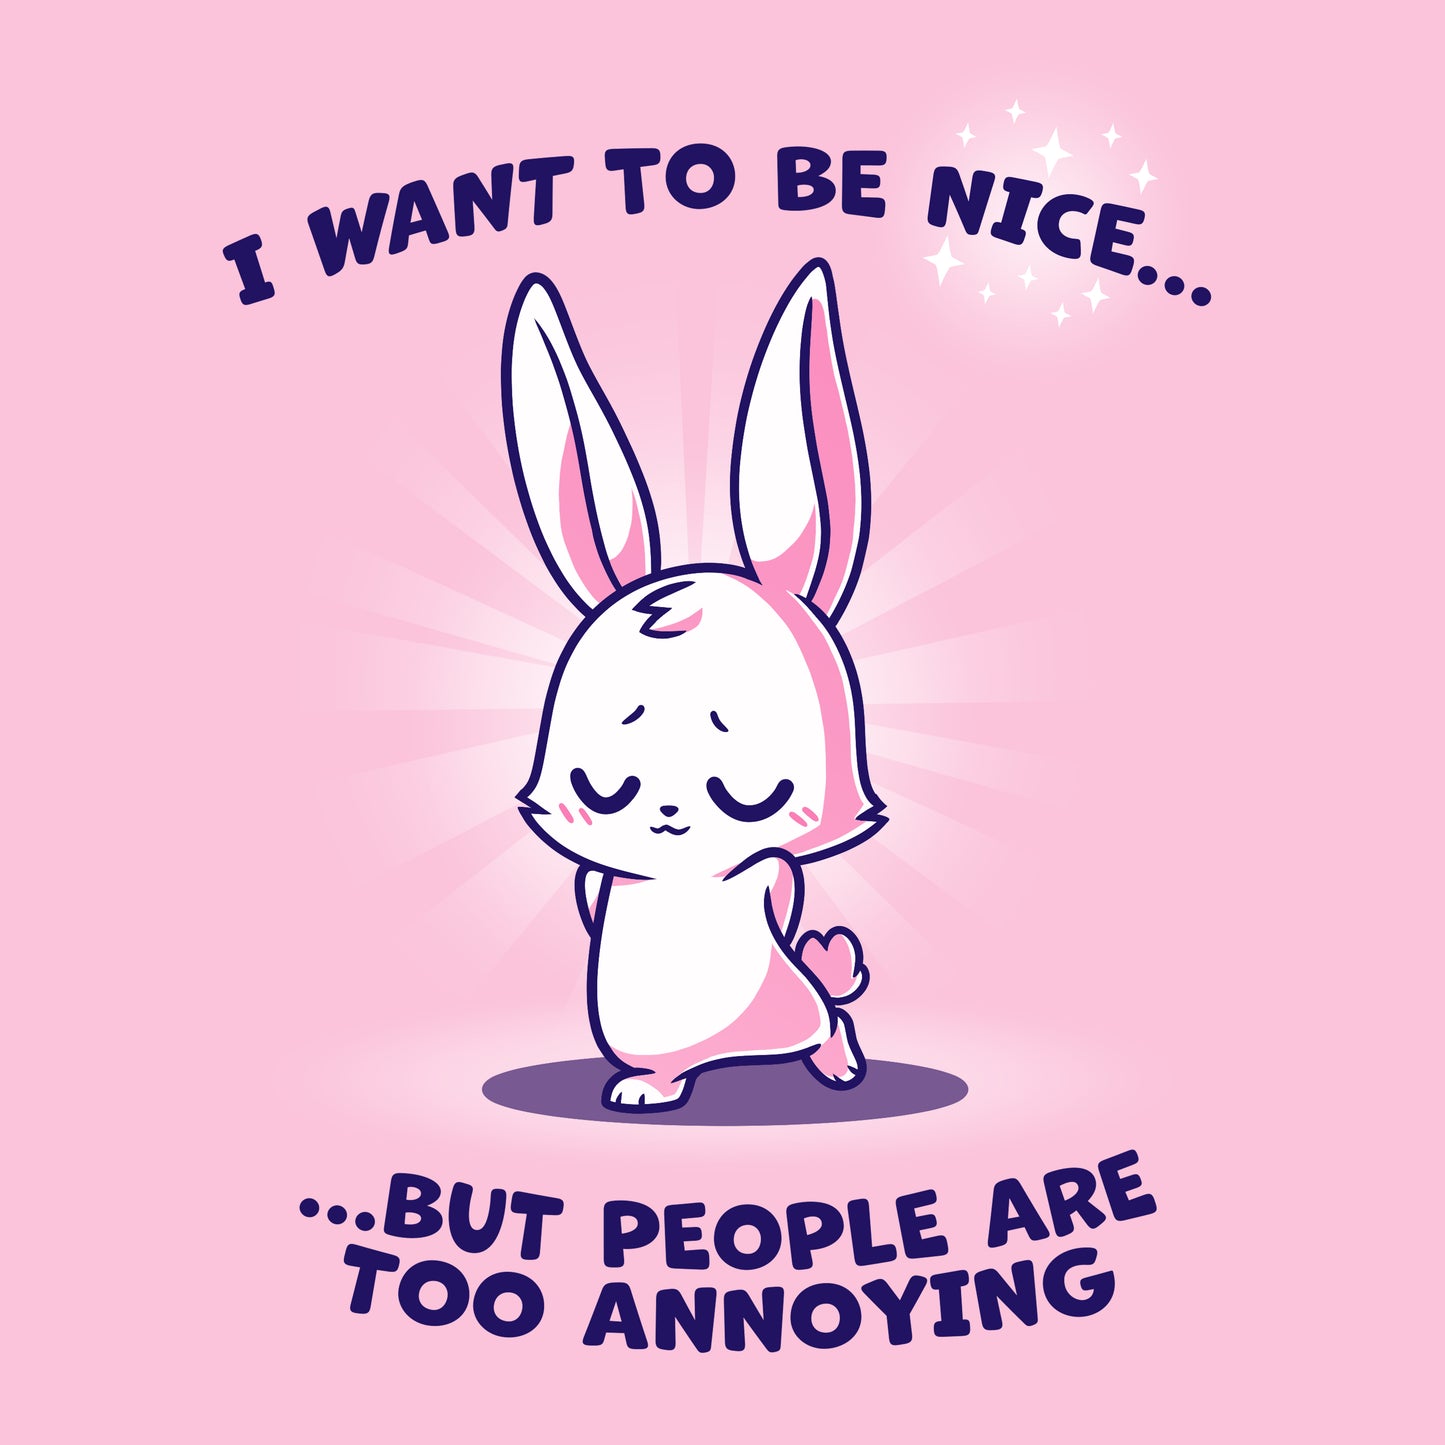 I want to be nice to people but they are too annoying. I Want to Be Nice... by TeeTurtle.